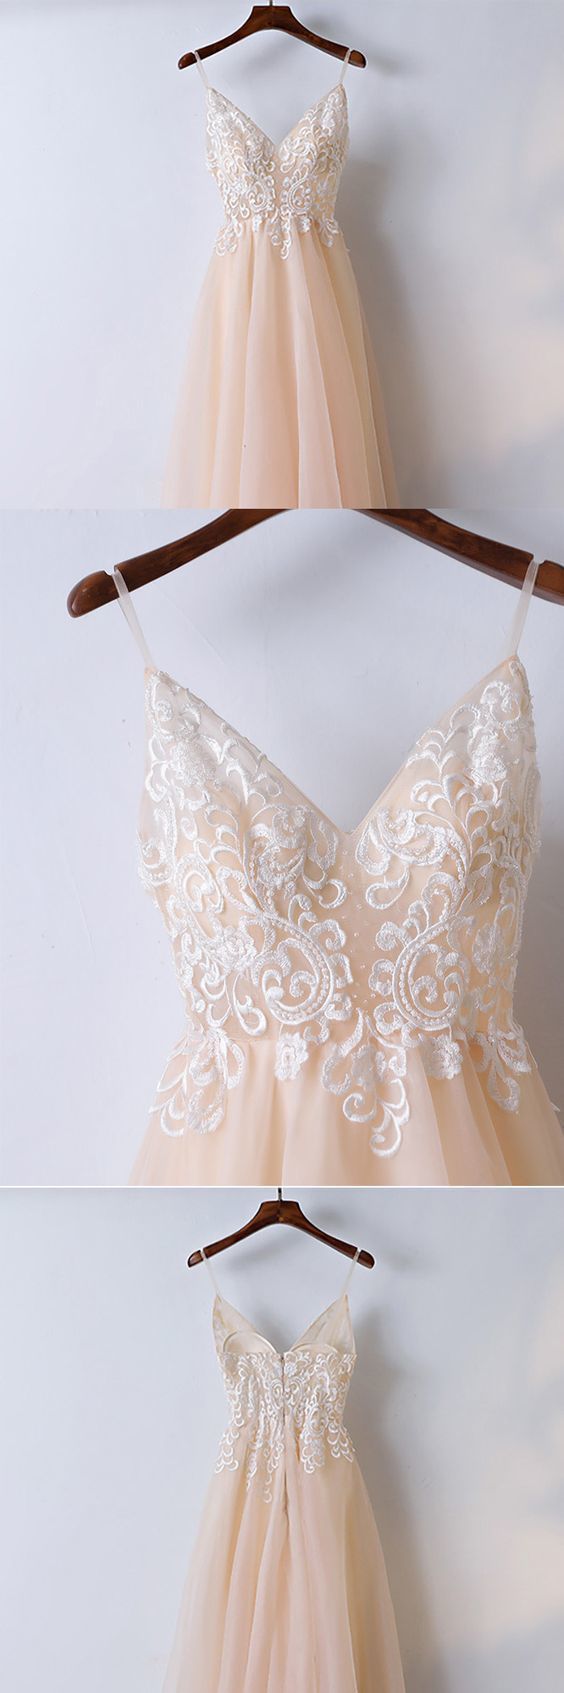 Champagne Lace Long Prom Dress With Spaghetti Straps M7286